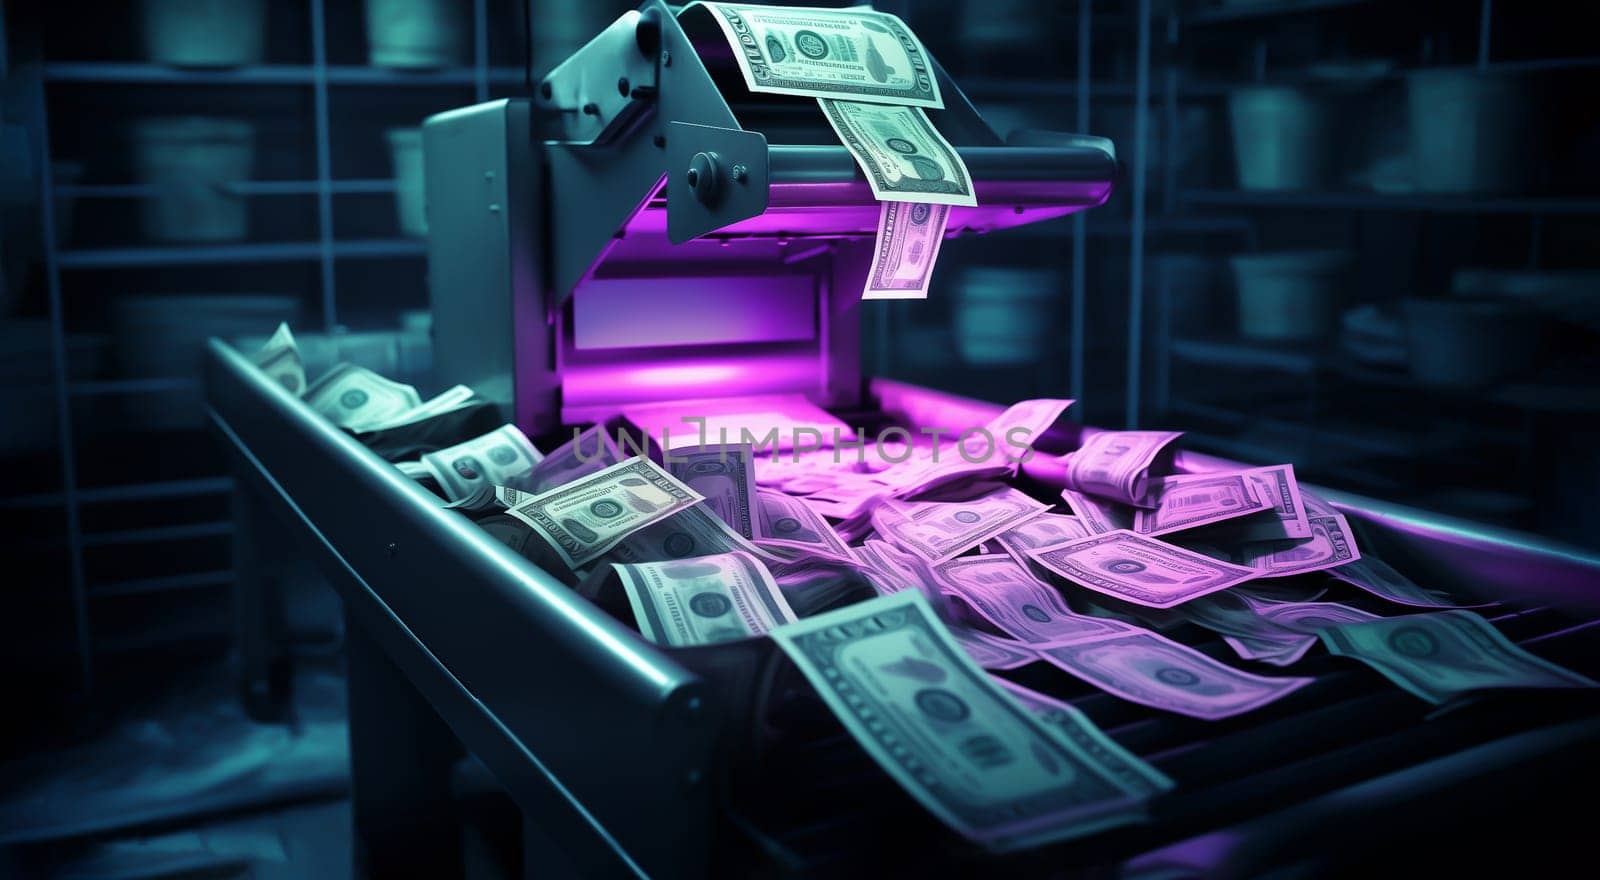 Printing Money Dollars Of Usa Bills On A Print Press Machine In Typography In Neon Light Finance, Tax, Stock Market And Investment, Making Money Concept. Inflation Or Crysis. Ai Generated.